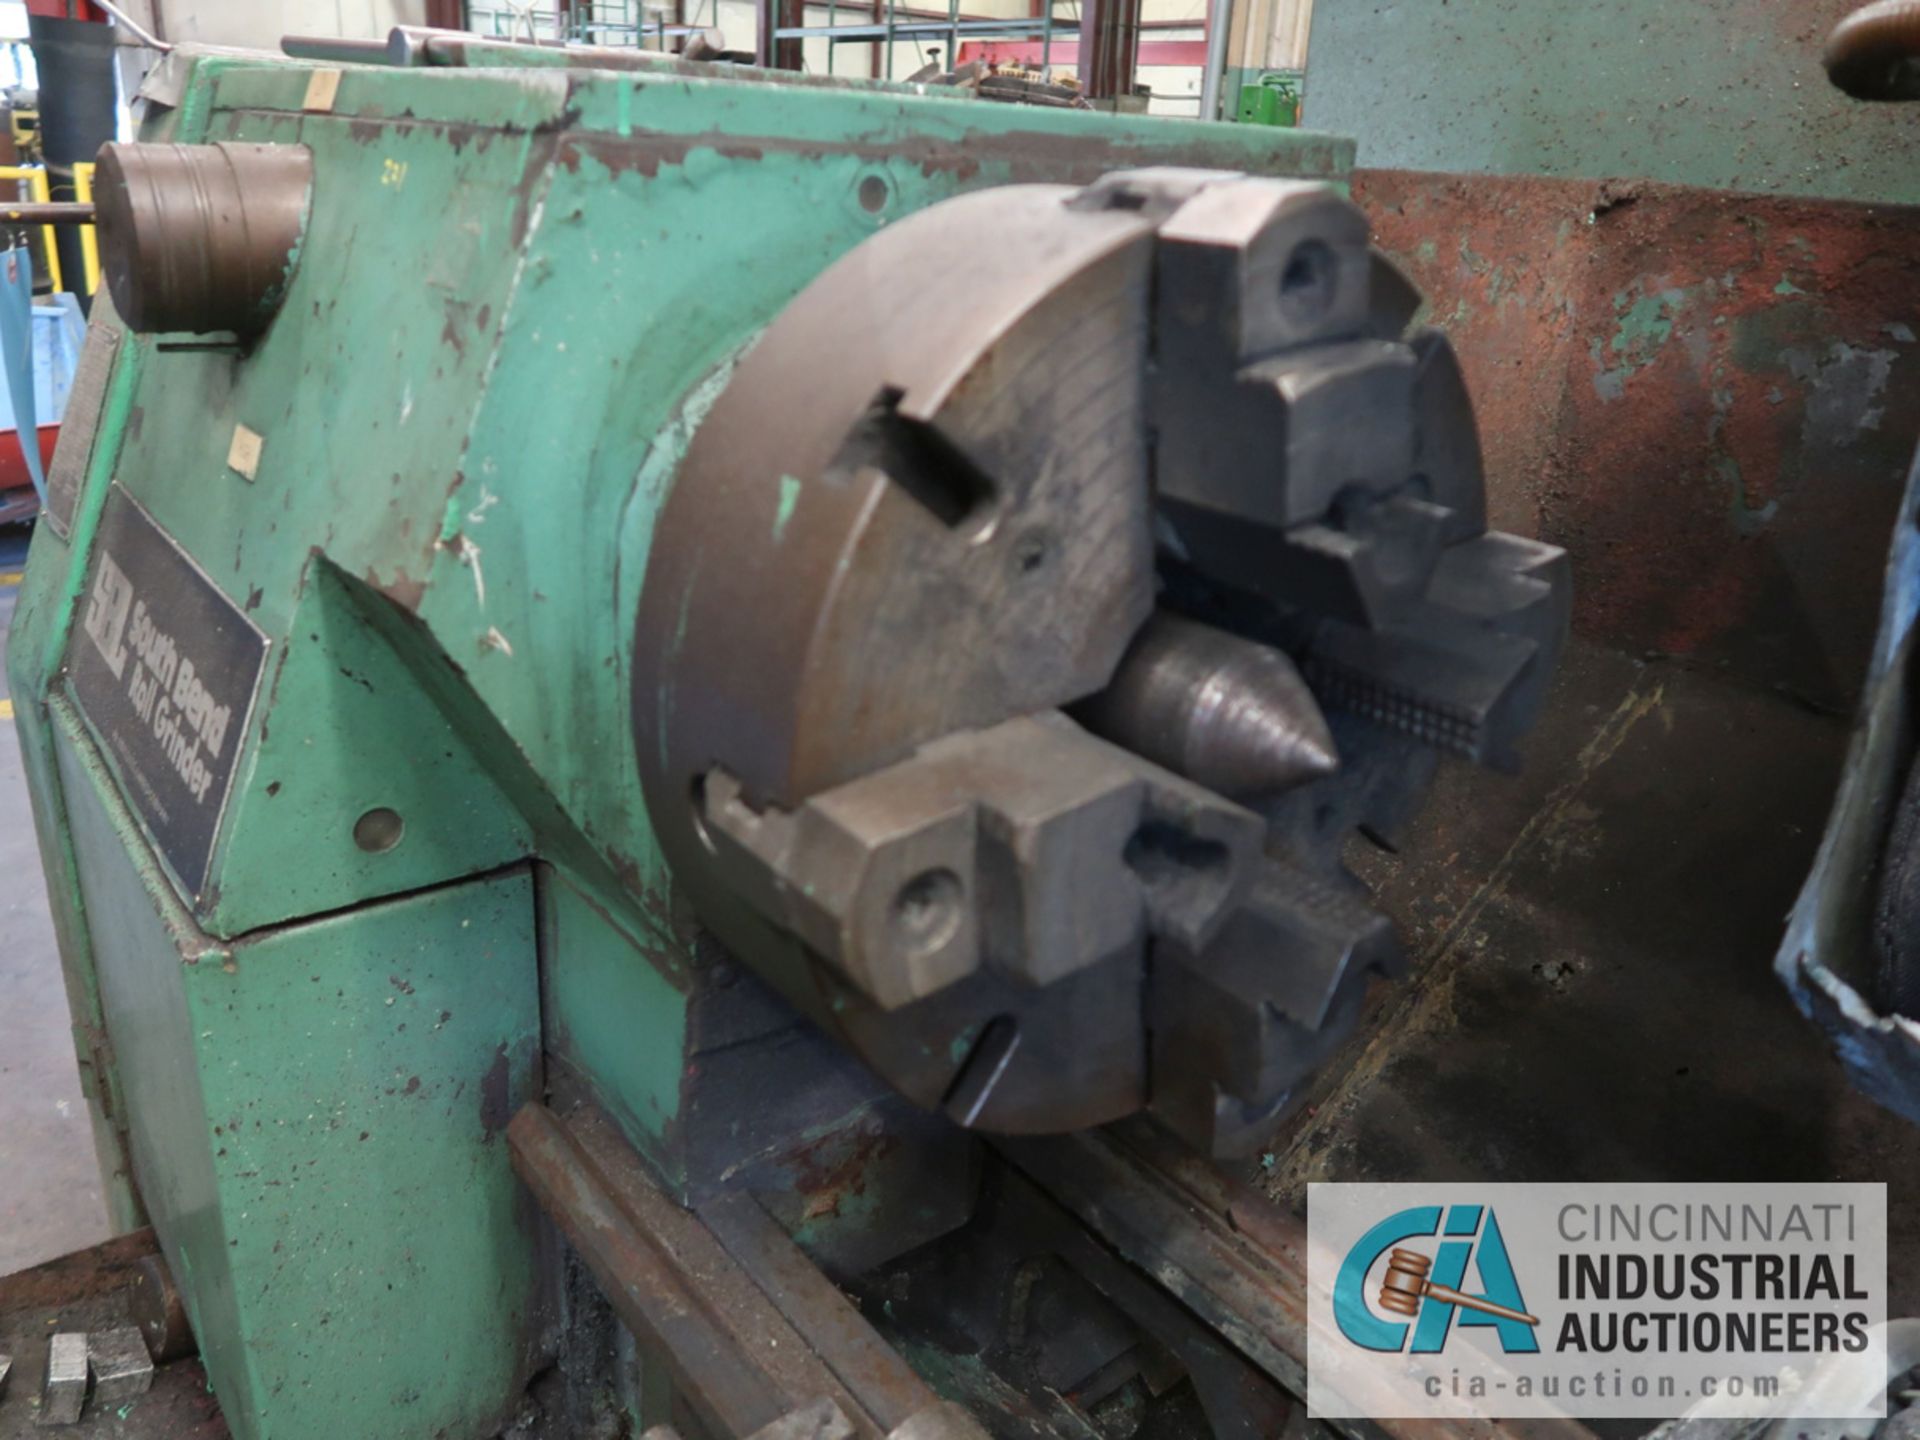 24" X 16' SOUTH BEND ROLL GRINDER; S/N 118AM, 500 RPM, 22" 4-JAW CHUCK, TAILSTOCK, GRINDER - Image 5 of 11